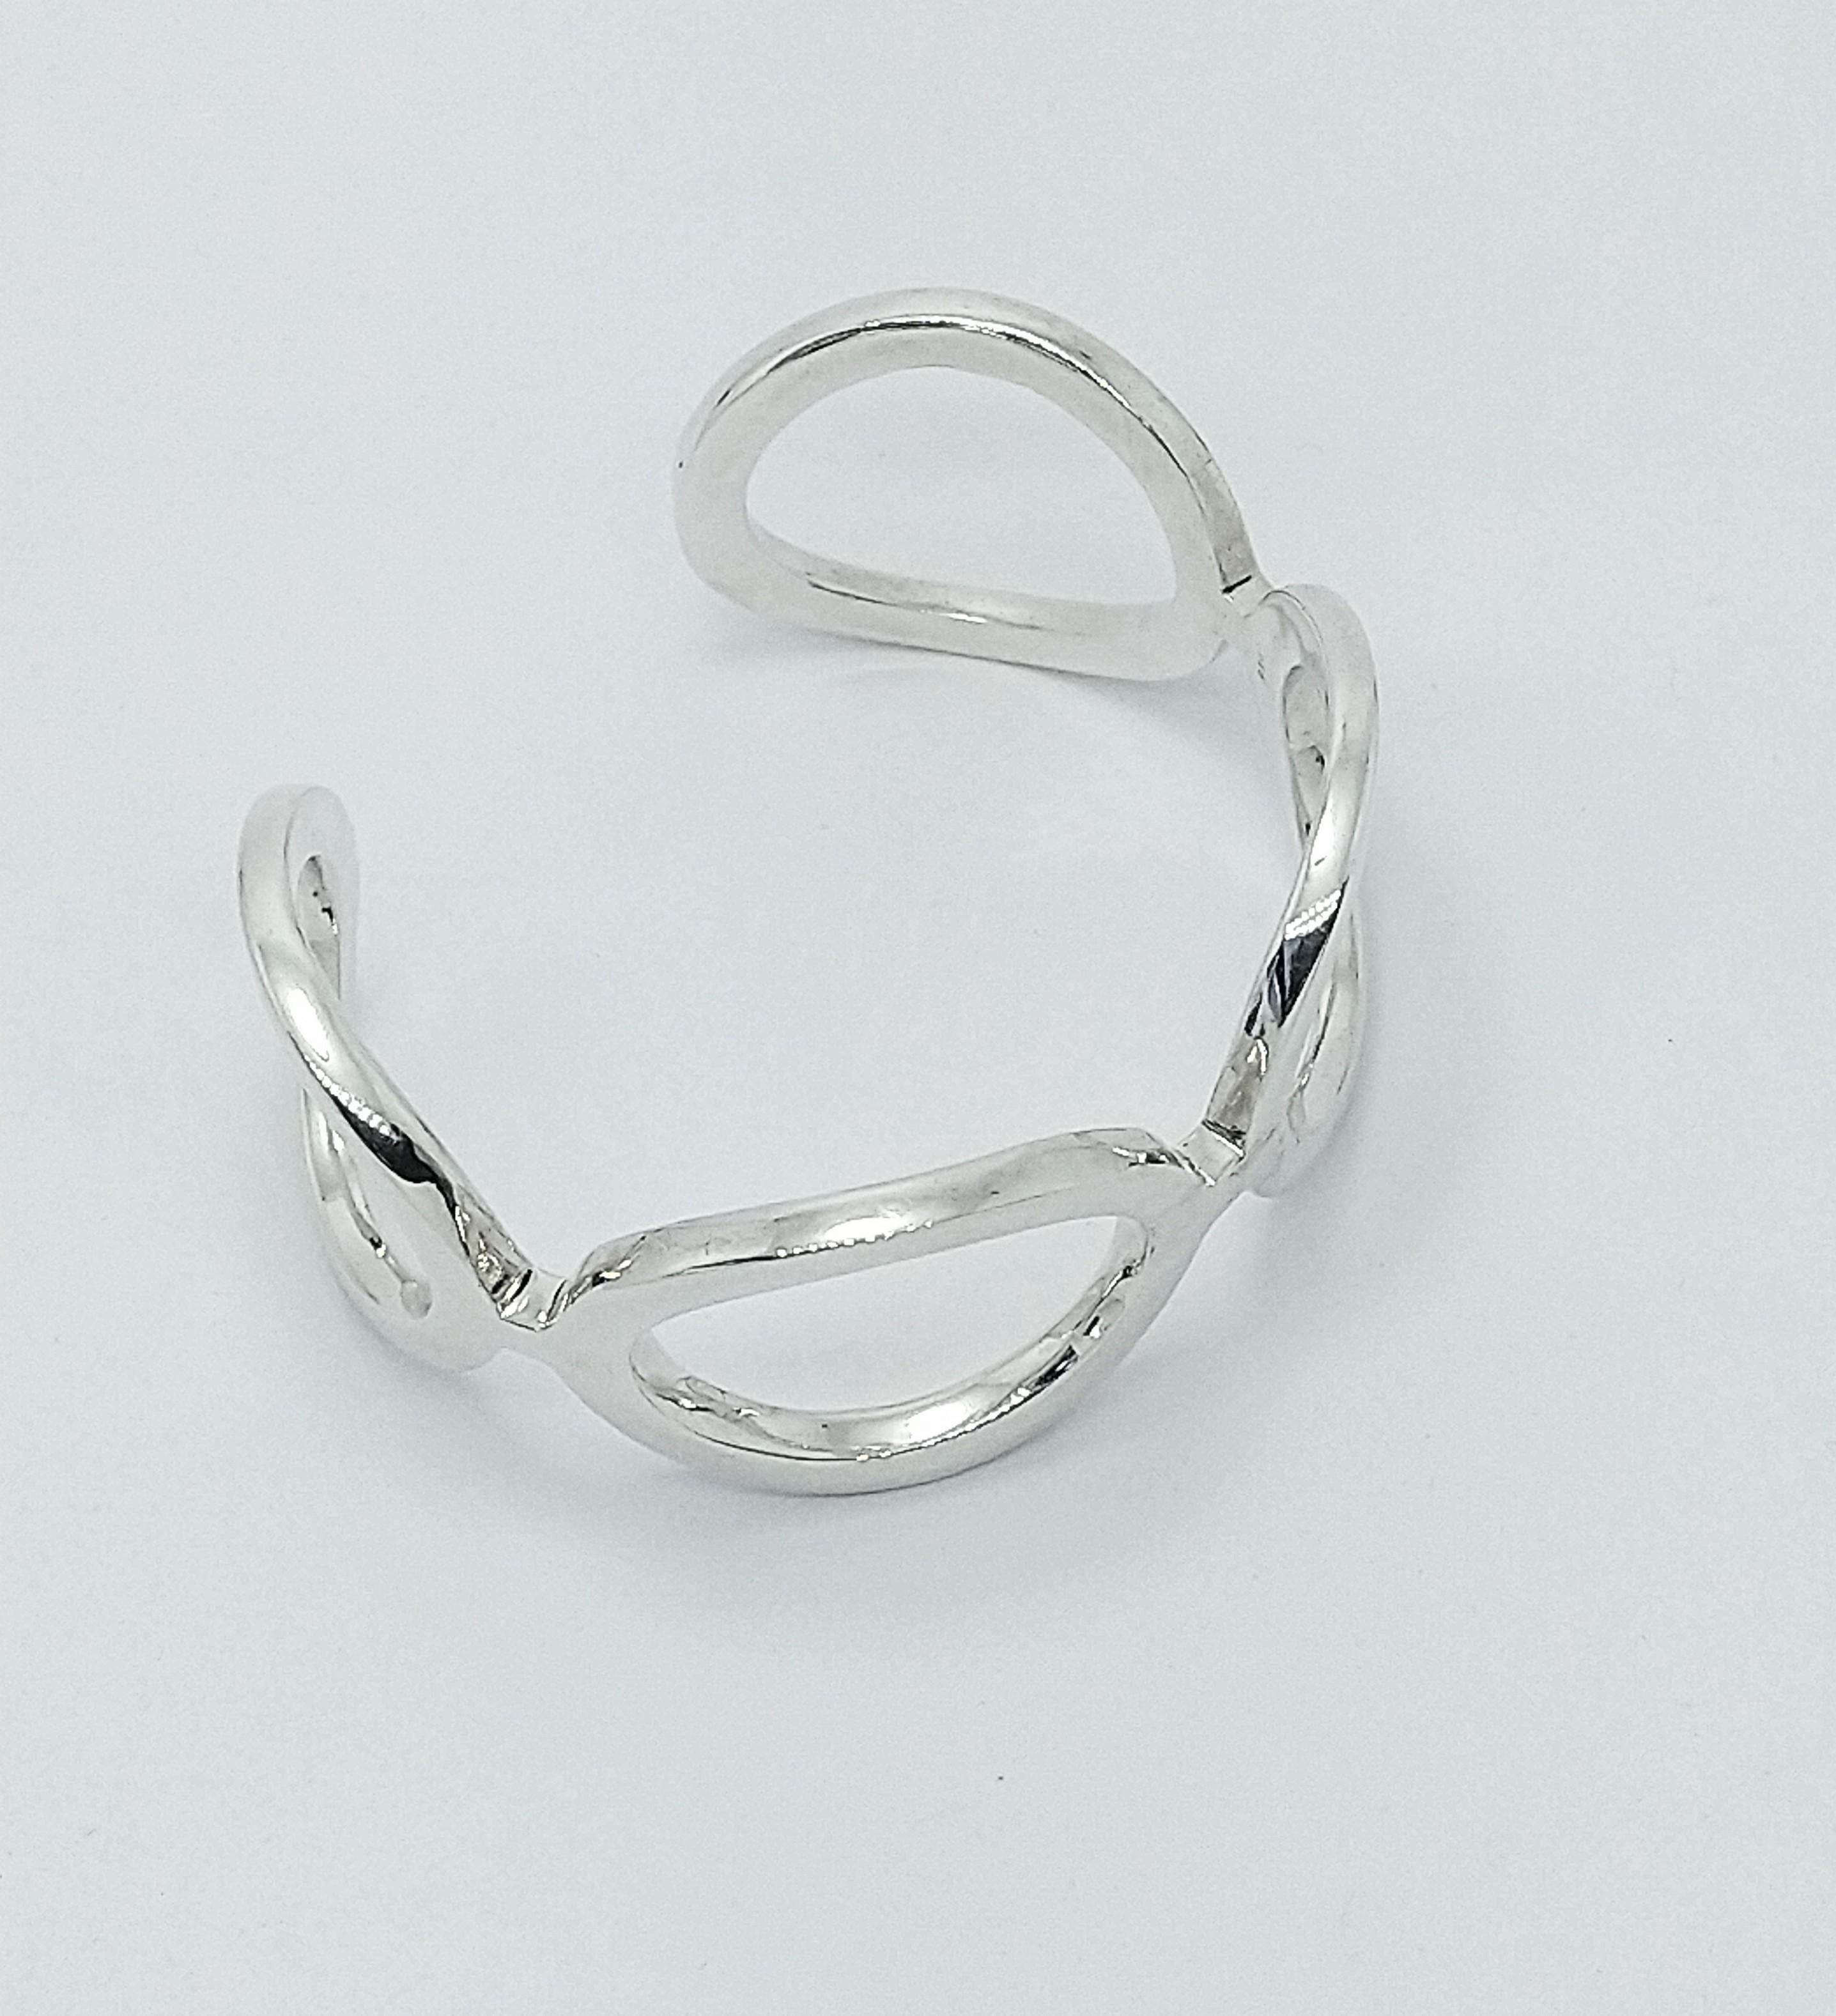 Sterling Silver Oval Cuff Bracelet , 4 x 3 mm thick x 29 mm wide. This is one of my early designs.  I was using simple shapes for the ultimate in expression of sculpture and a piece of jewelry. One of the 3 cuff bracelets geometric collection I